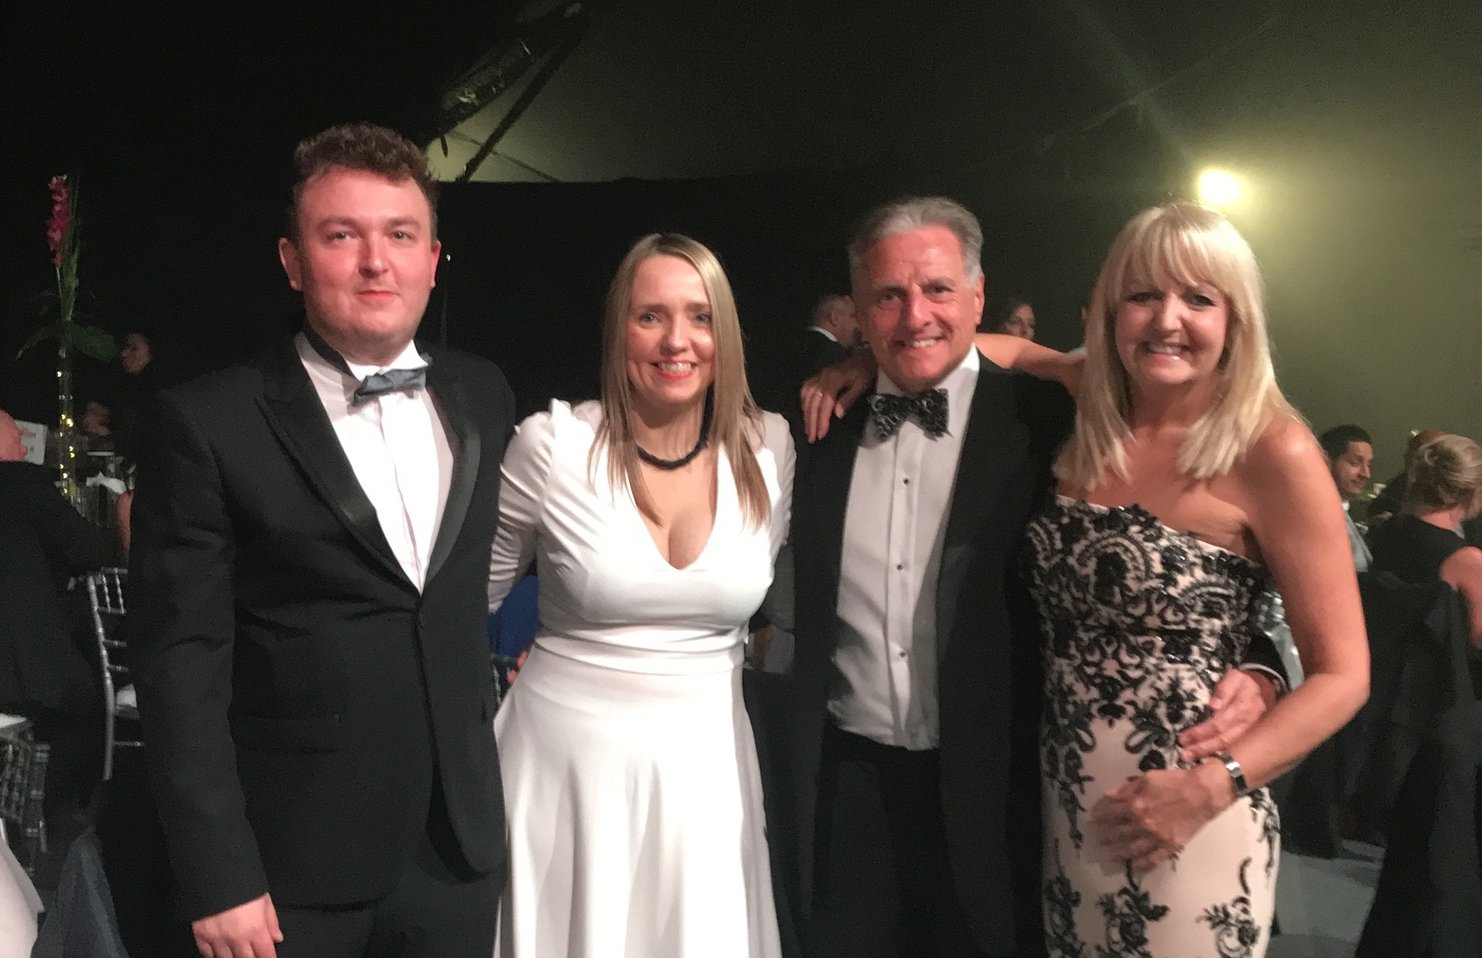 Wearside Pneumatics supporting the Daisy Chain Project at the Lobster Ball